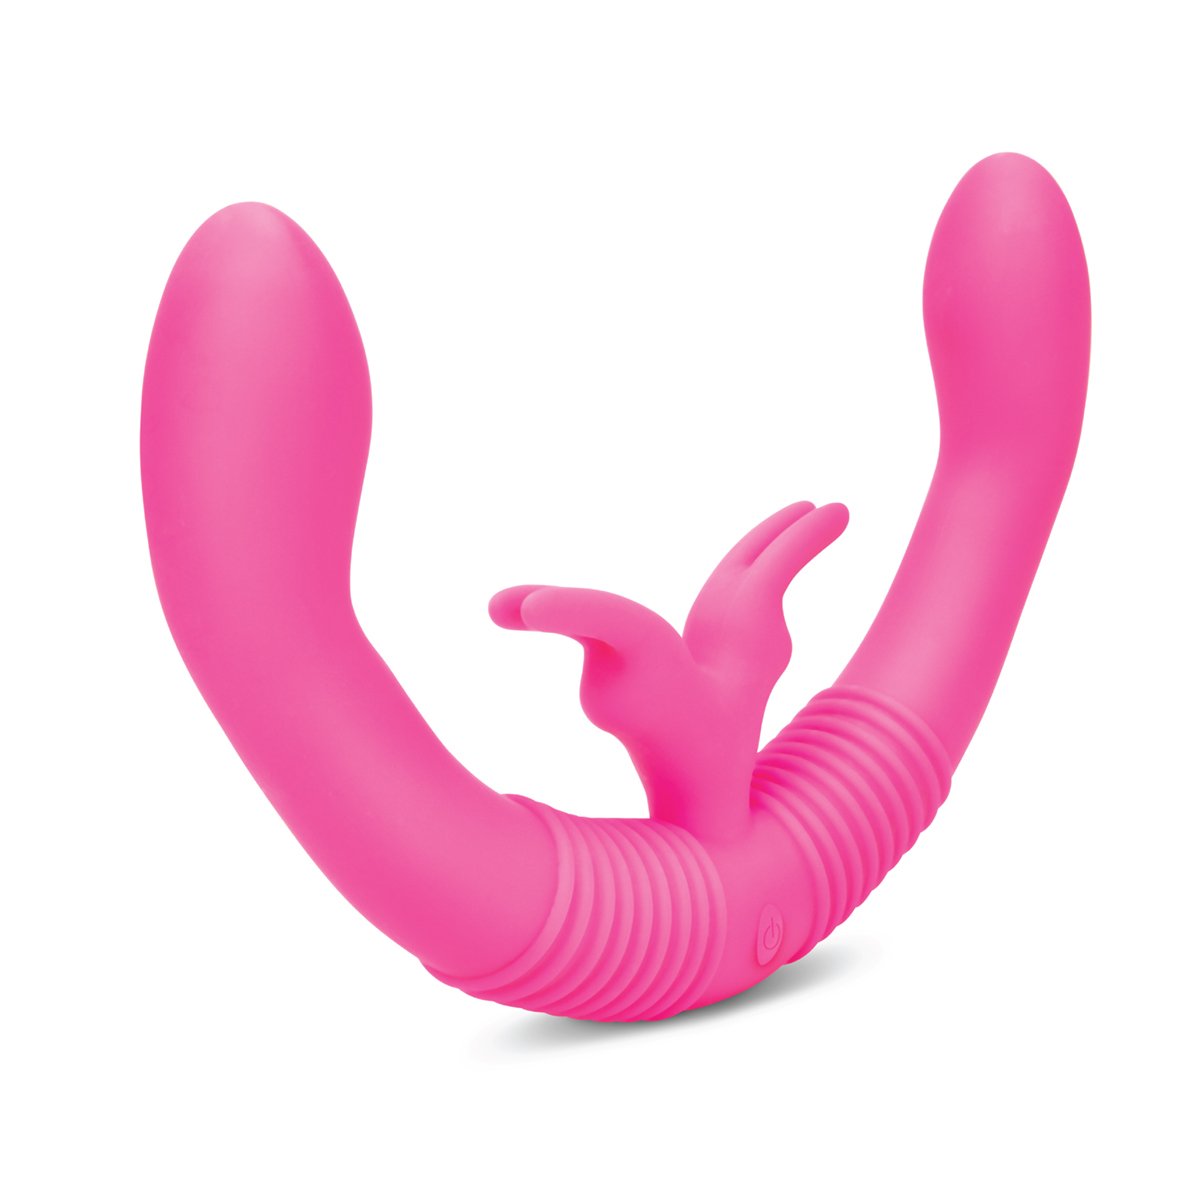 Using a Sex Toy or Vibrator with a Partner